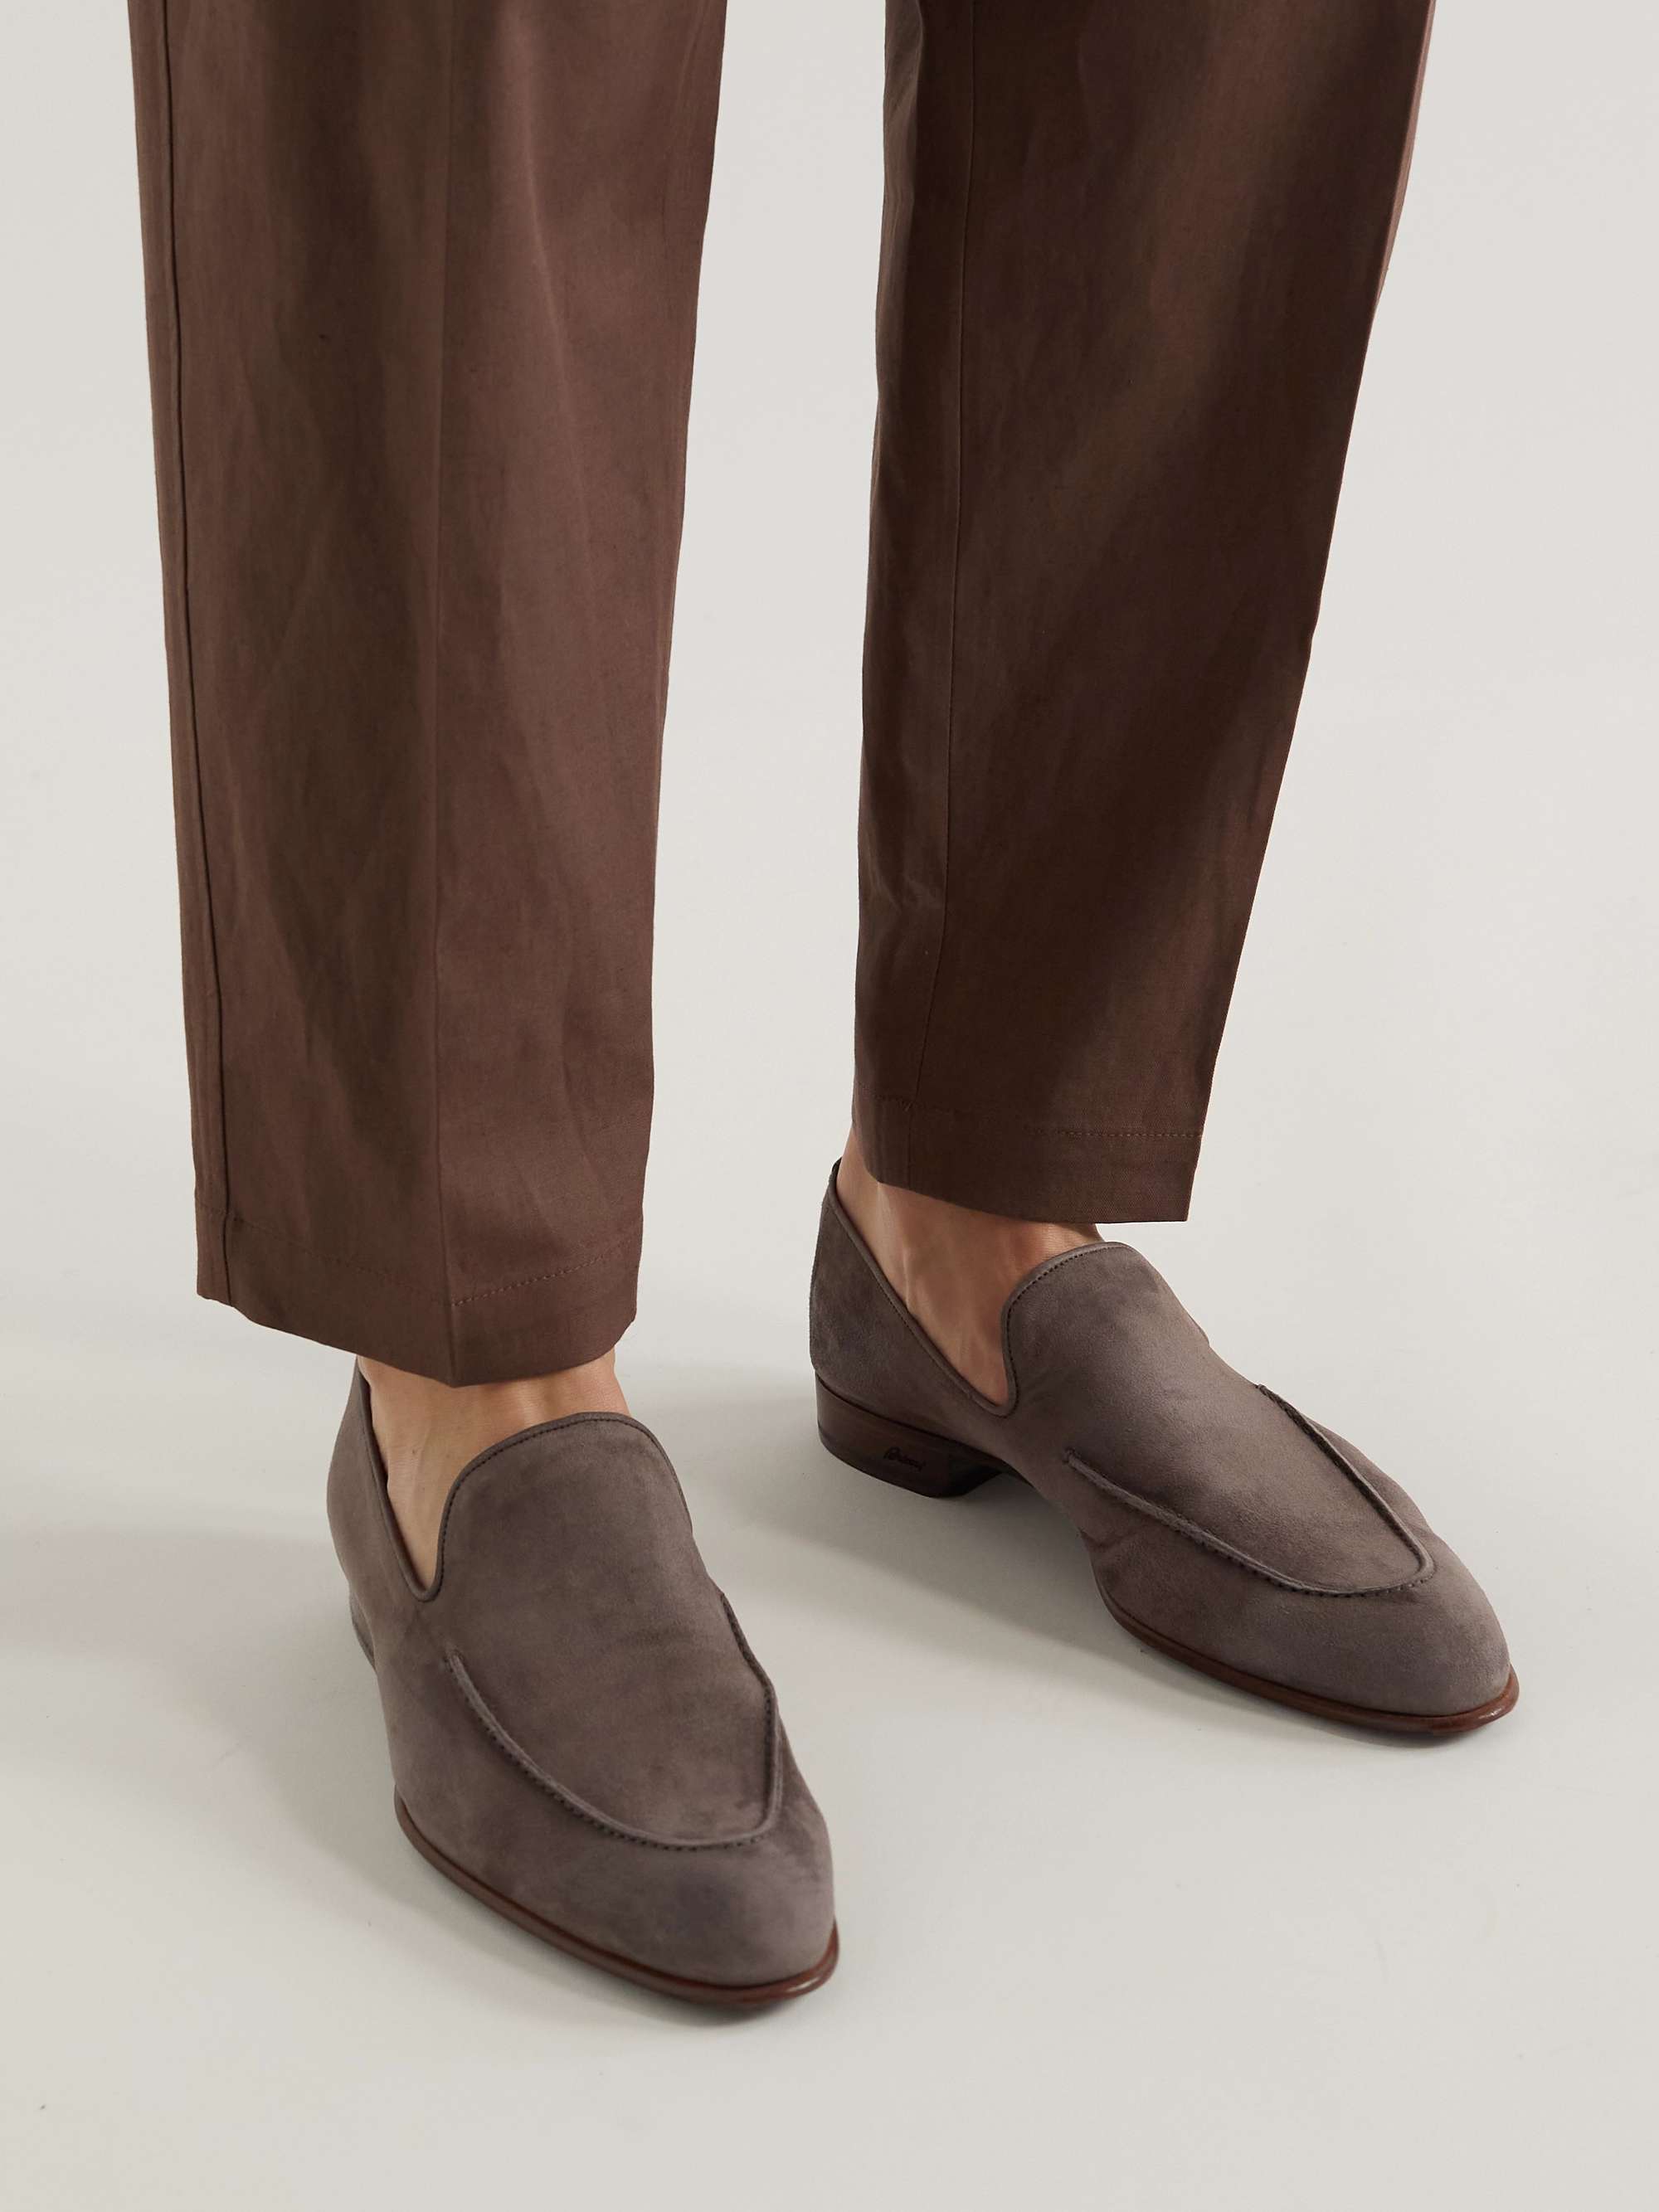 BRIONI Suede Loafers